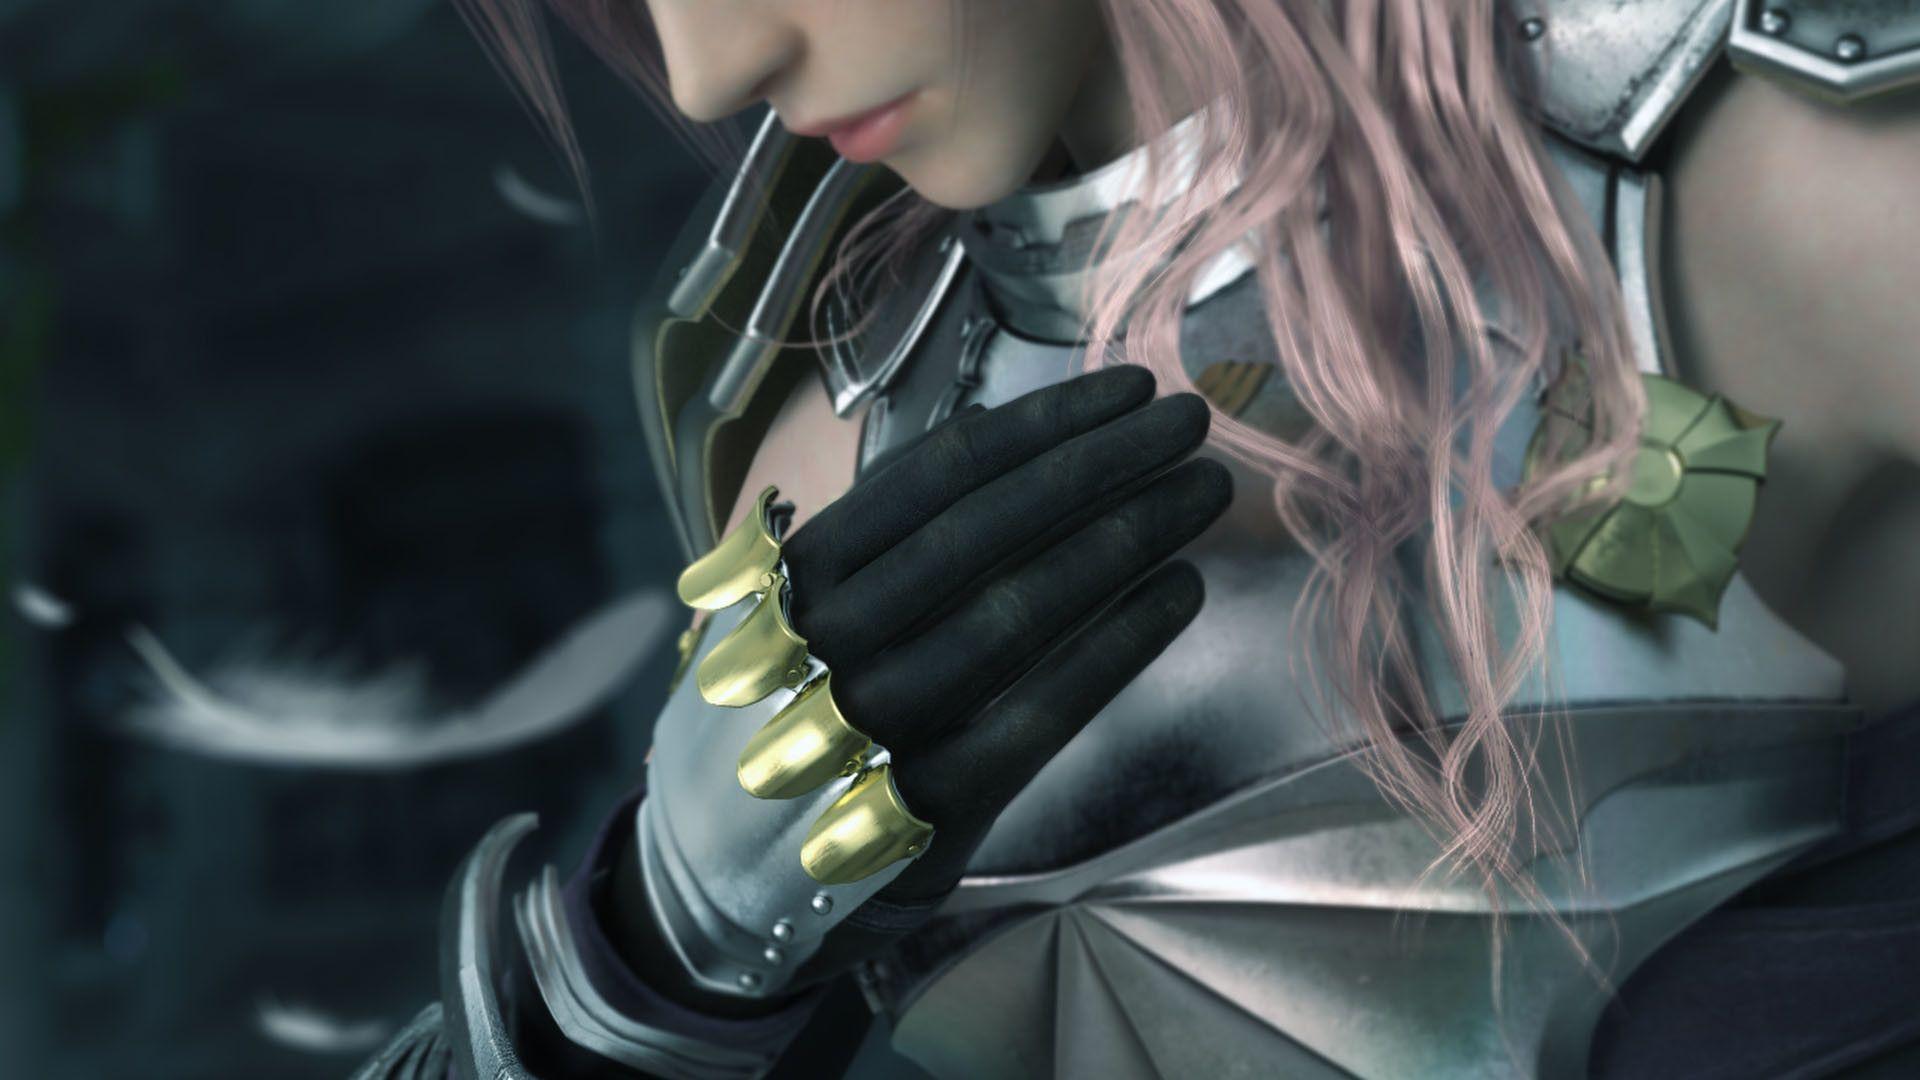 Final Fantasy XIII Wallpaper 1080p (the best image in 2018)